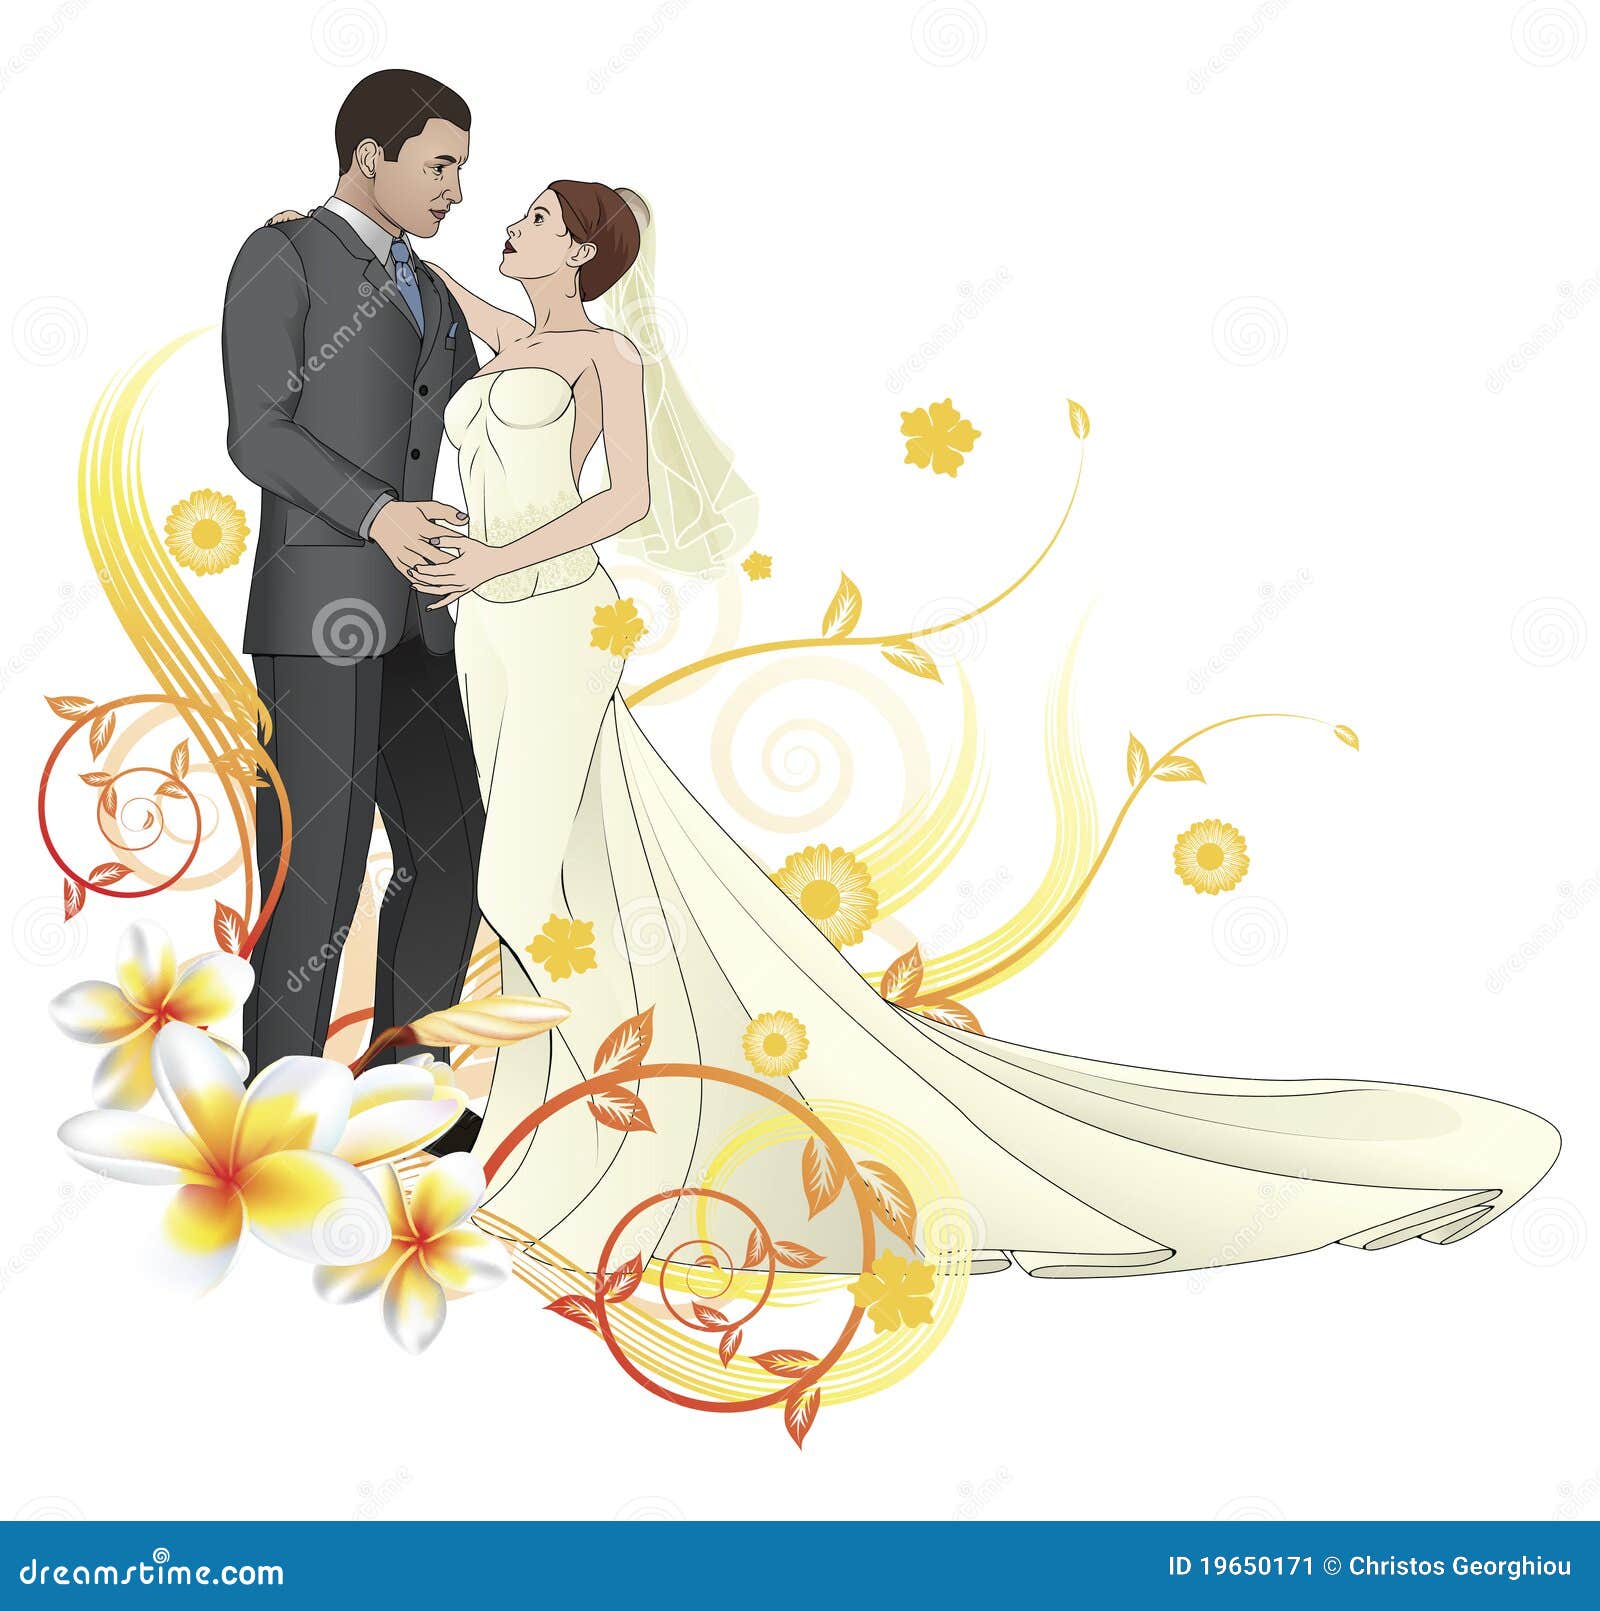 Bride And Groom Dancing Floral Background Stock Vector